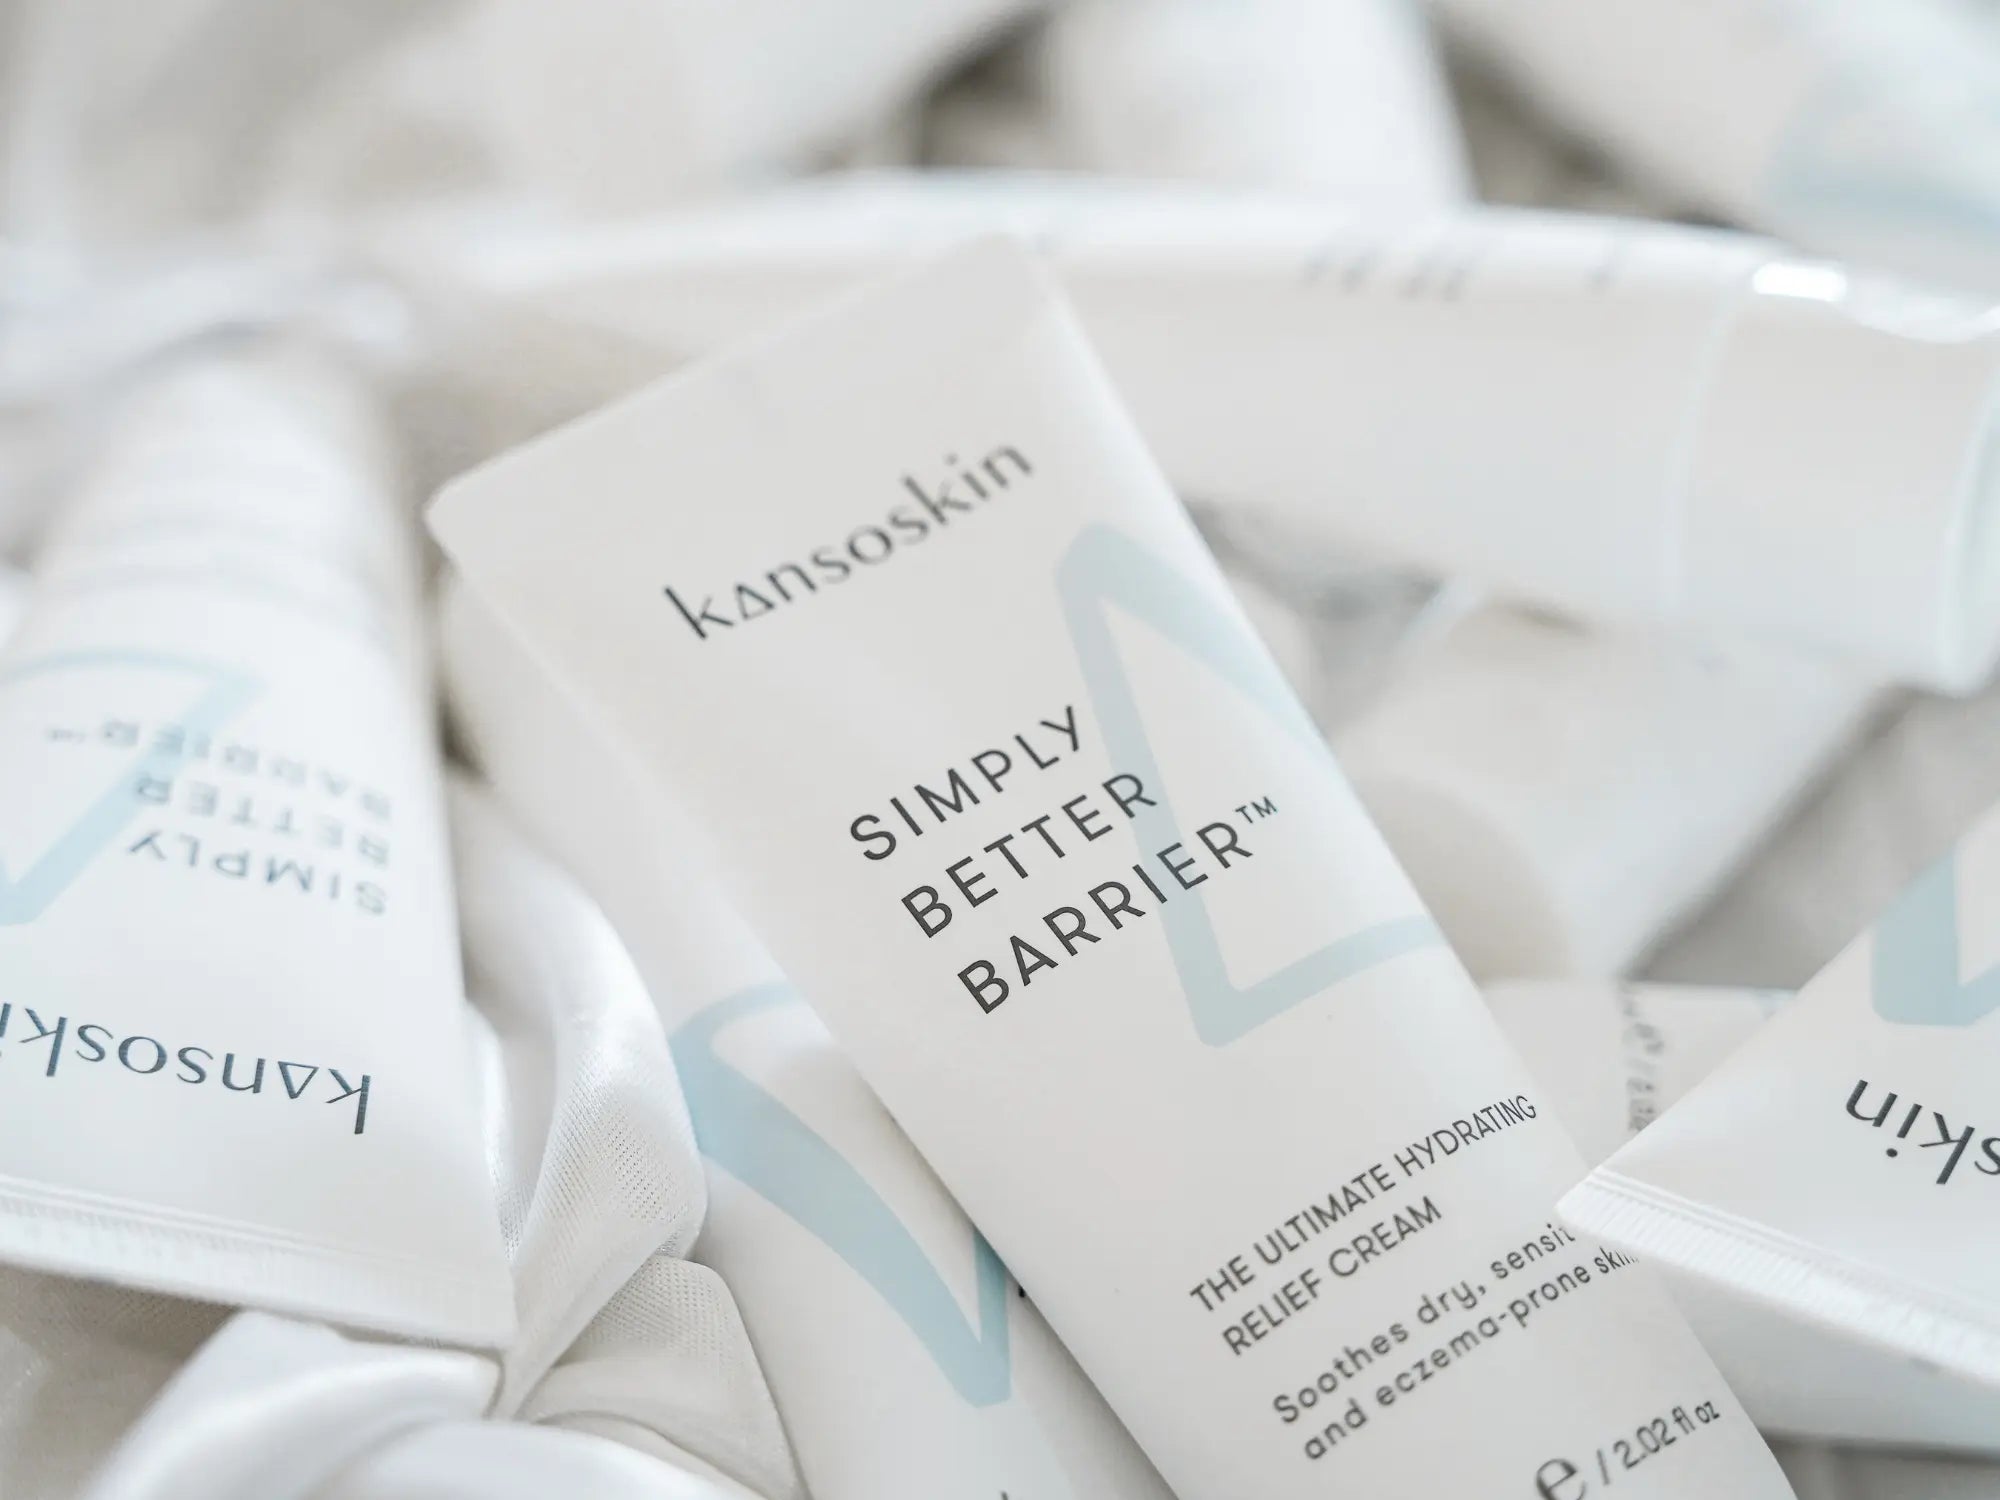 A Bunch of Simply Better Barrier Creams